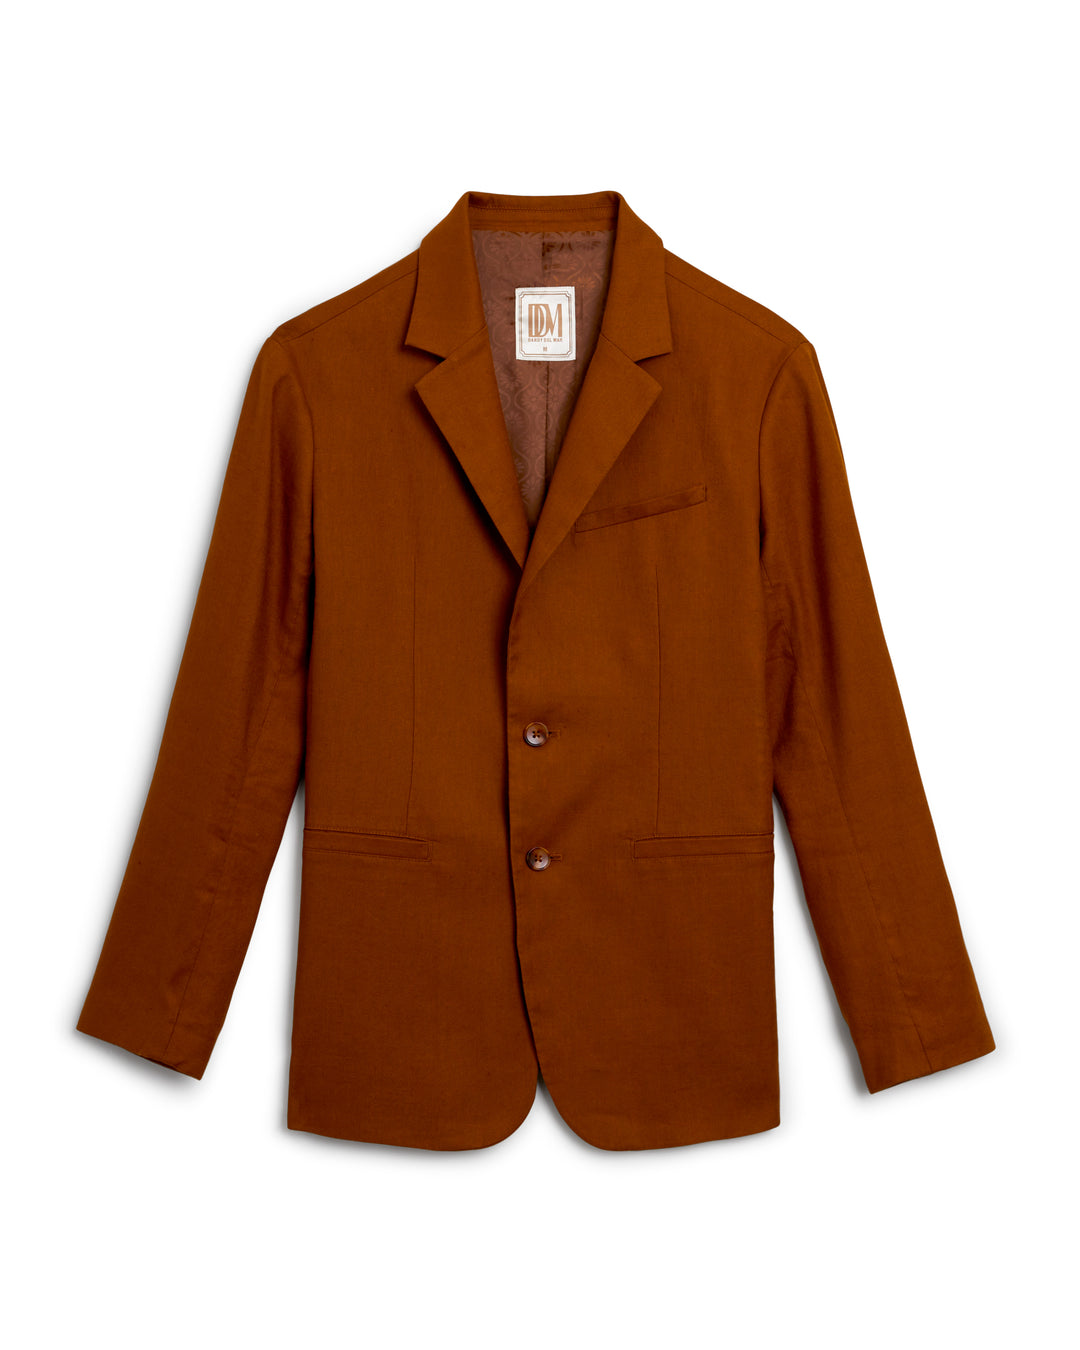 A brown Dandy Del Mar Brisa Linen Blazer - Sedona on a white background, perfect for formal flirtations or night events.